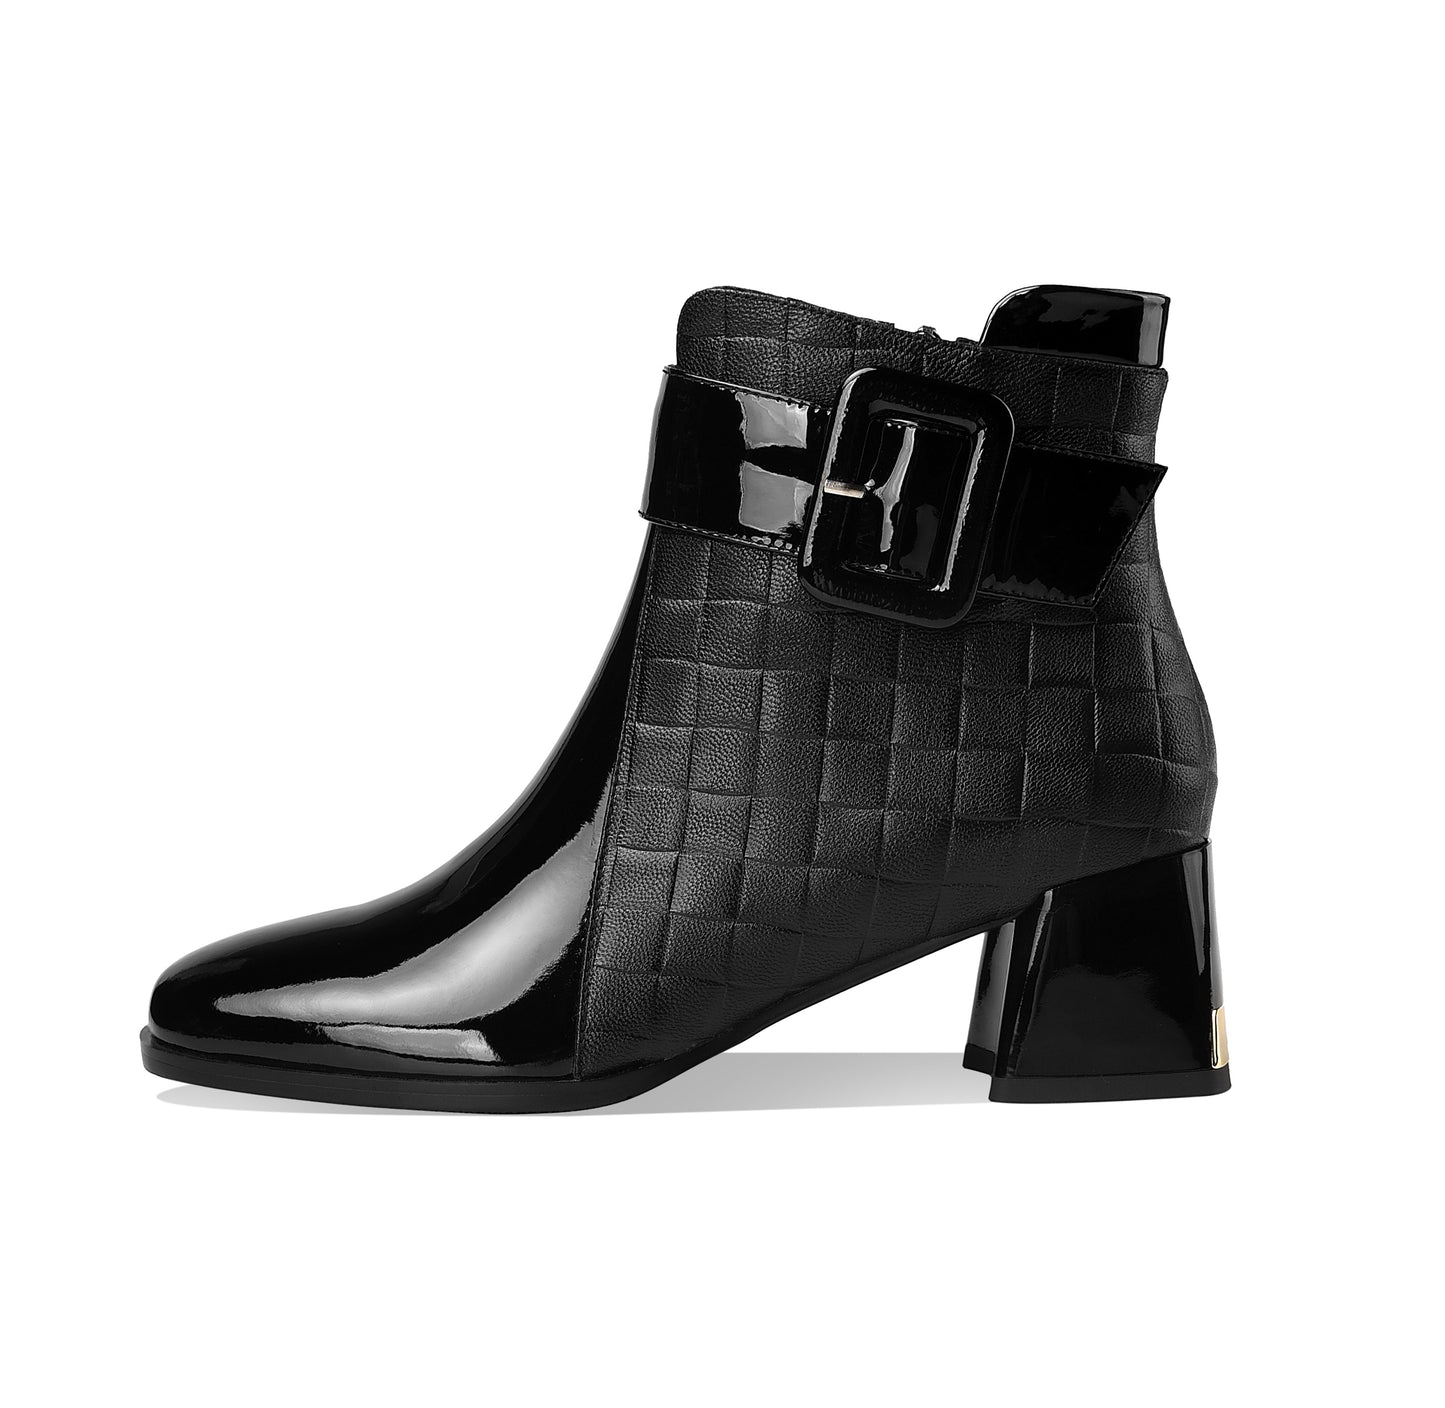 TinaCus Genuine Leather Women's Handmade Chic Buckle Decor Chunky Heel Side Zip Up Checkered Ankle Boots